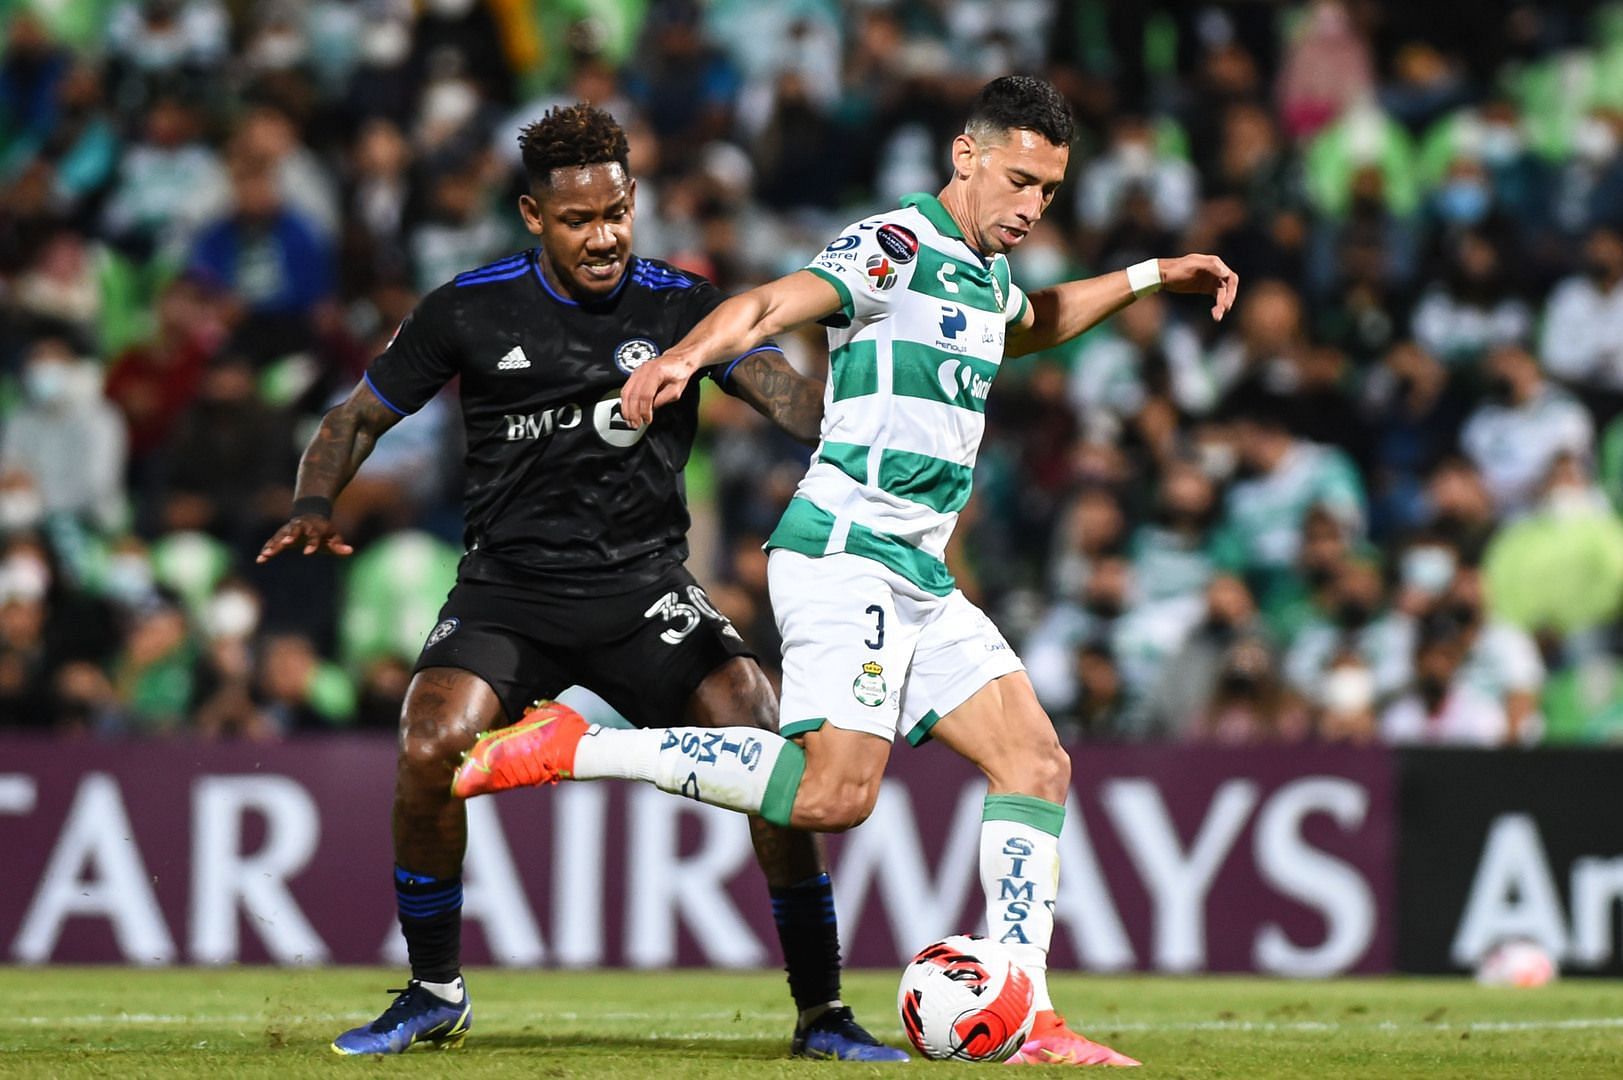 Montreal host Santos Laguna in their CONCACAF Champions League fixture on Tuesday